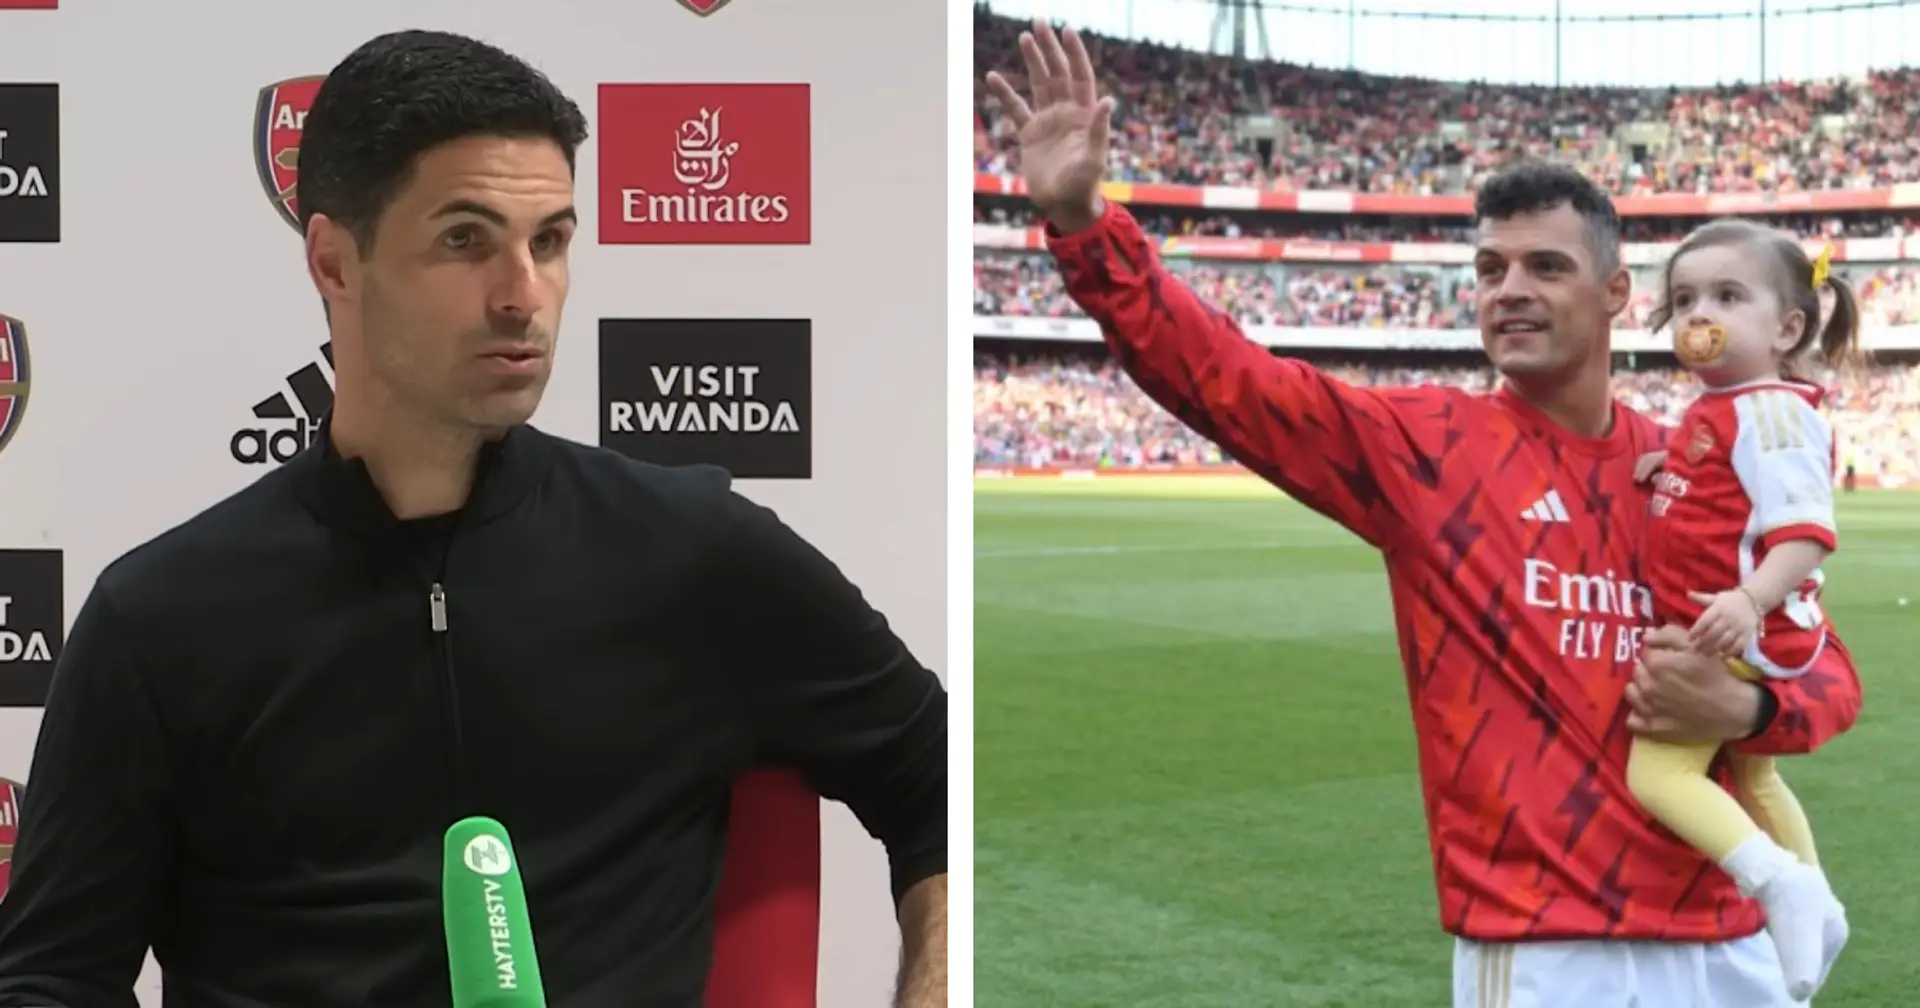 'That's news for me': Mikel Arteta responds to reports of Granit Xhaka leaving Arsenal